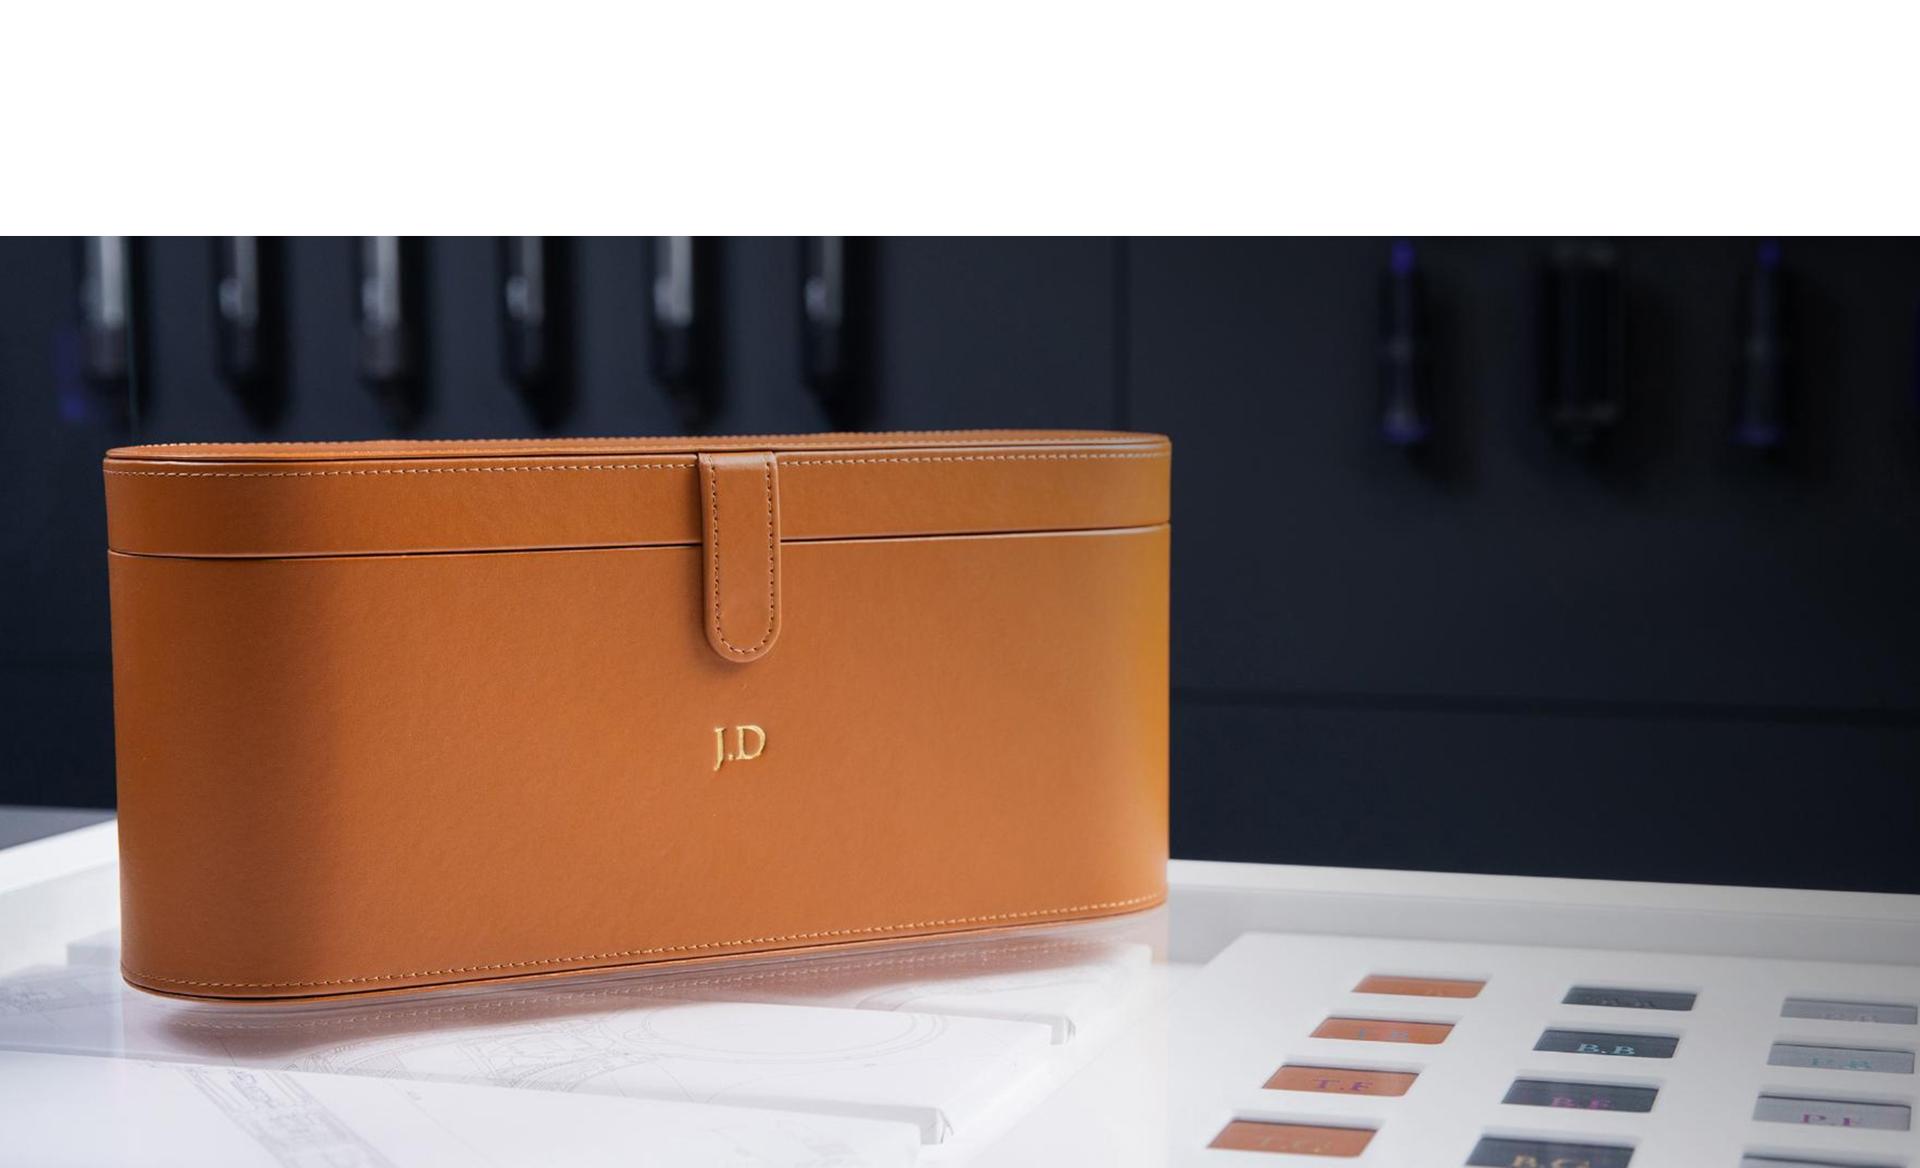 Presentation case with someone's initials